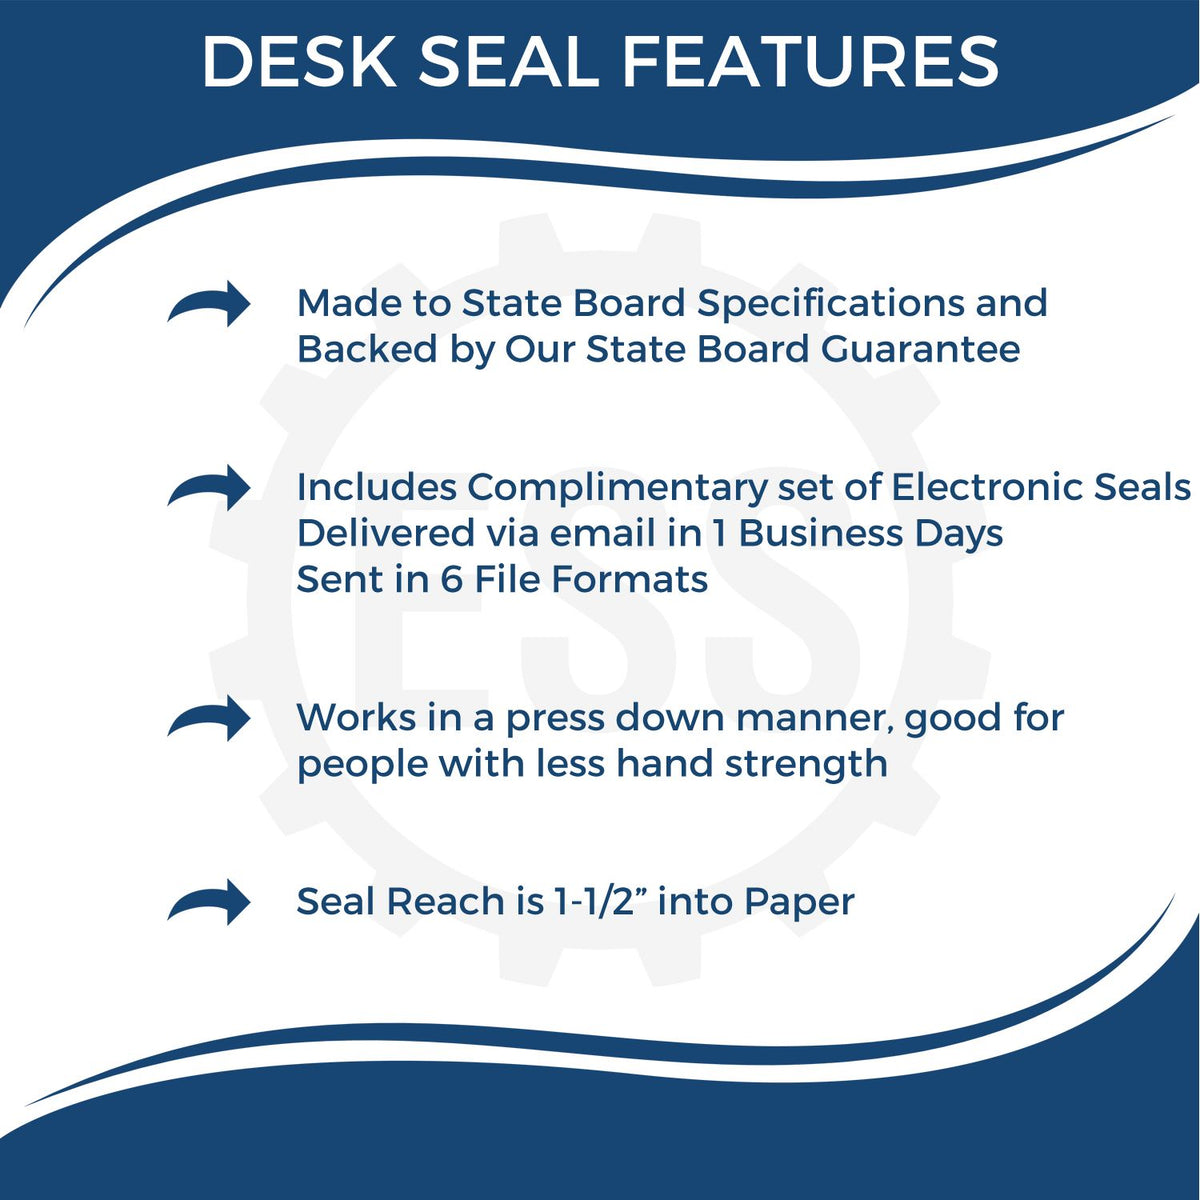 A picture of an infographic highlighting the selling points for the Rhode Island Desk Architect Embossing Seal